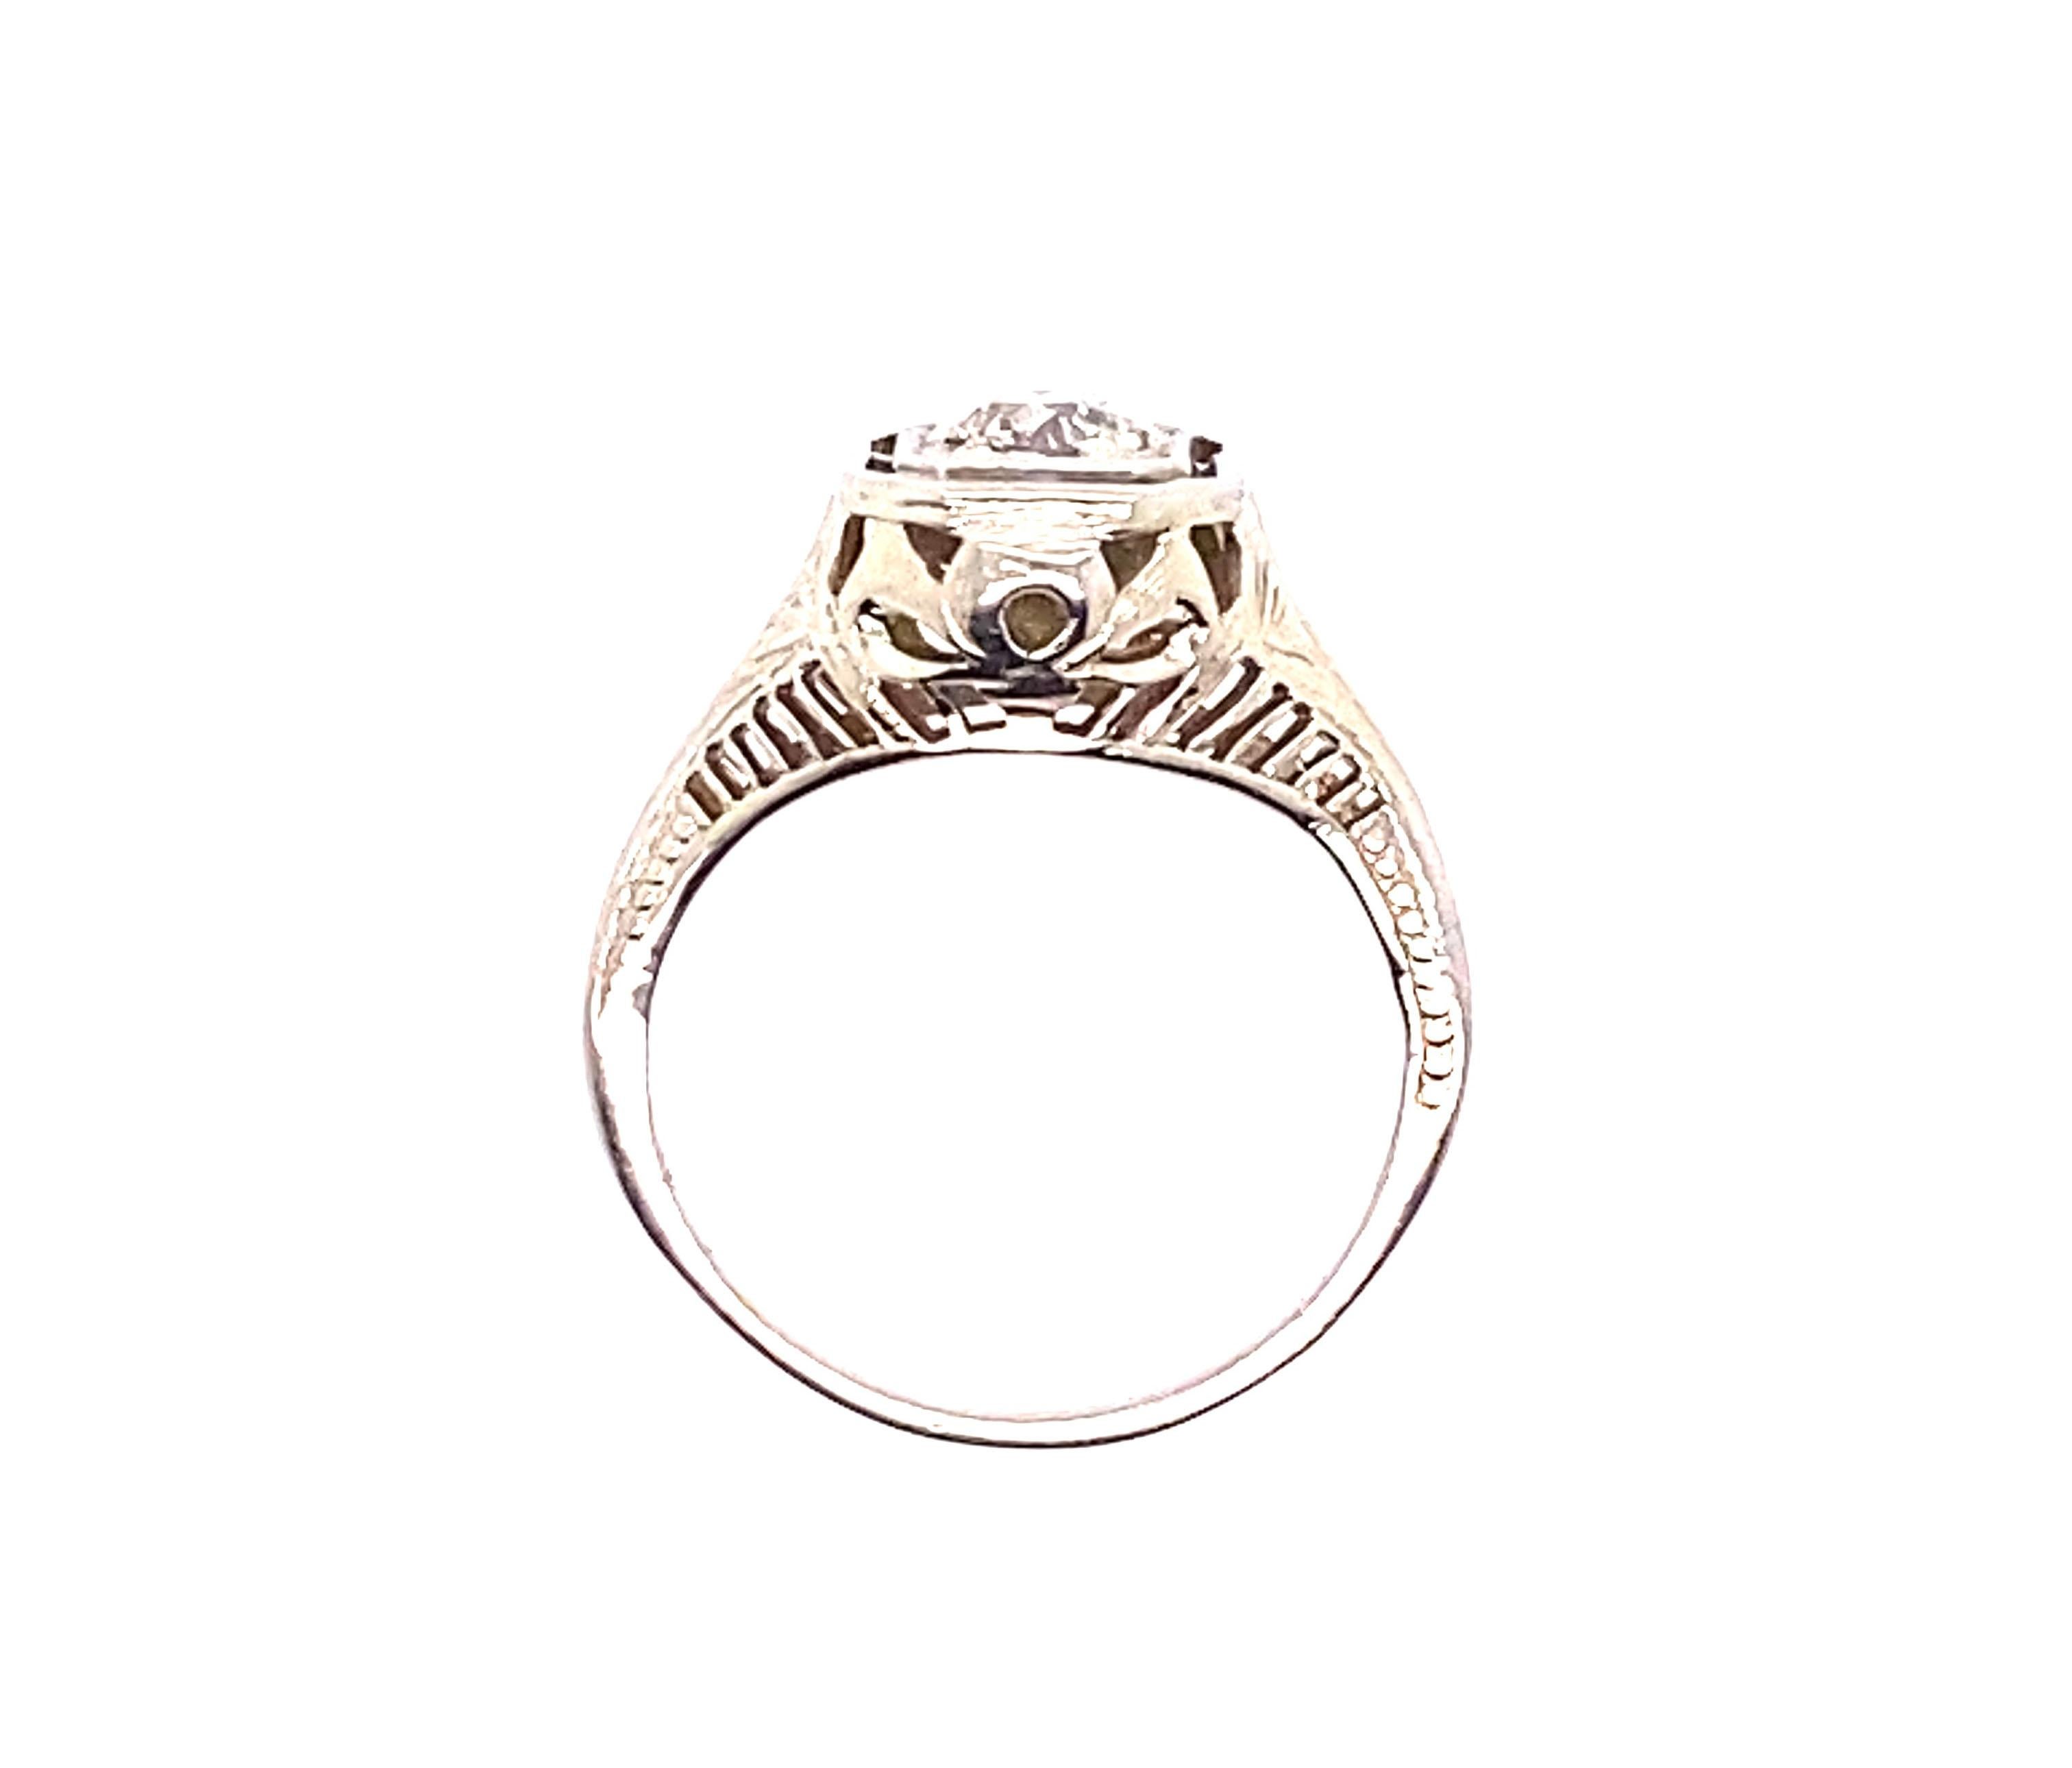 Genuine Original Art Deco Antique from 1910's -1920's Solitaire Engagement Ring .22ct Old European Cut Diamond 18K 


Featuring a Gorgeous Genuine .22ct Natural Mined Old European Cut Diamond Center

Culminating on Top with the Original Bright White